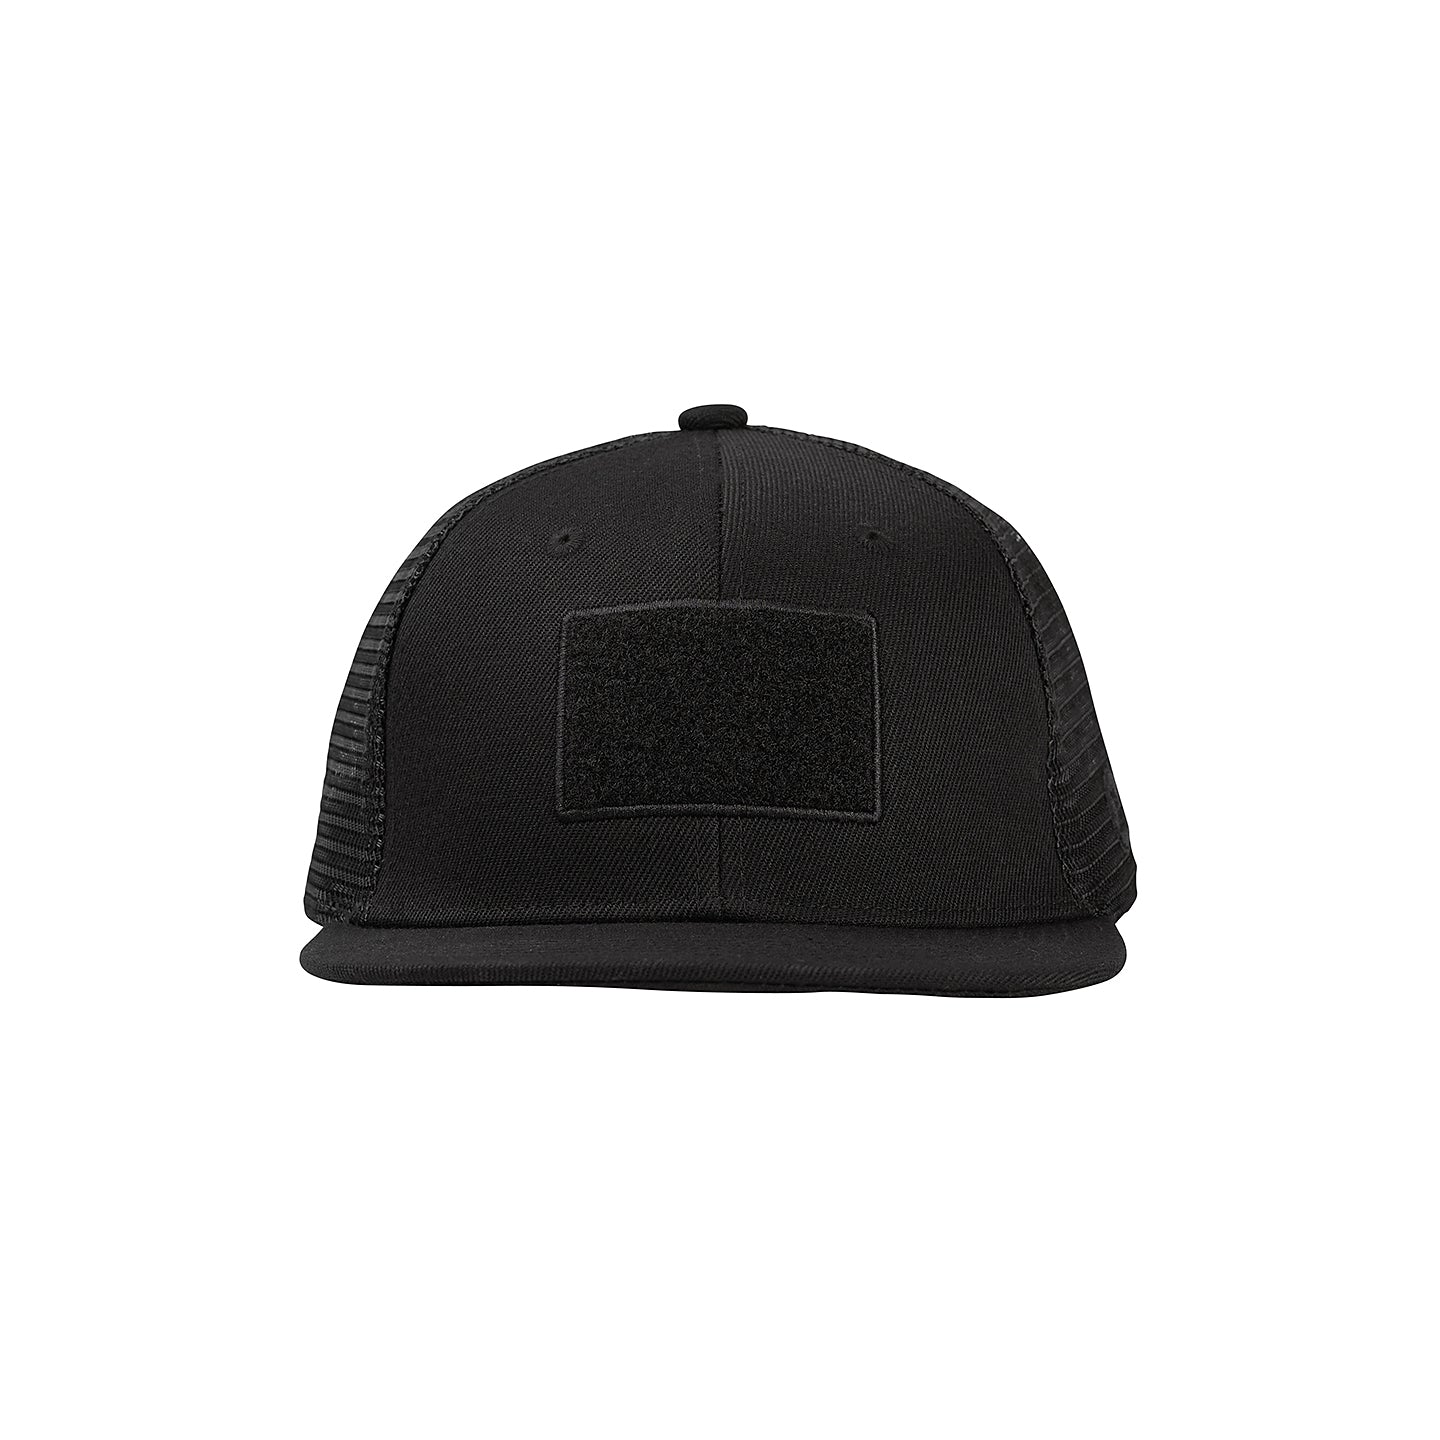 Tactical Patch Trucker - Black Hat - Front View